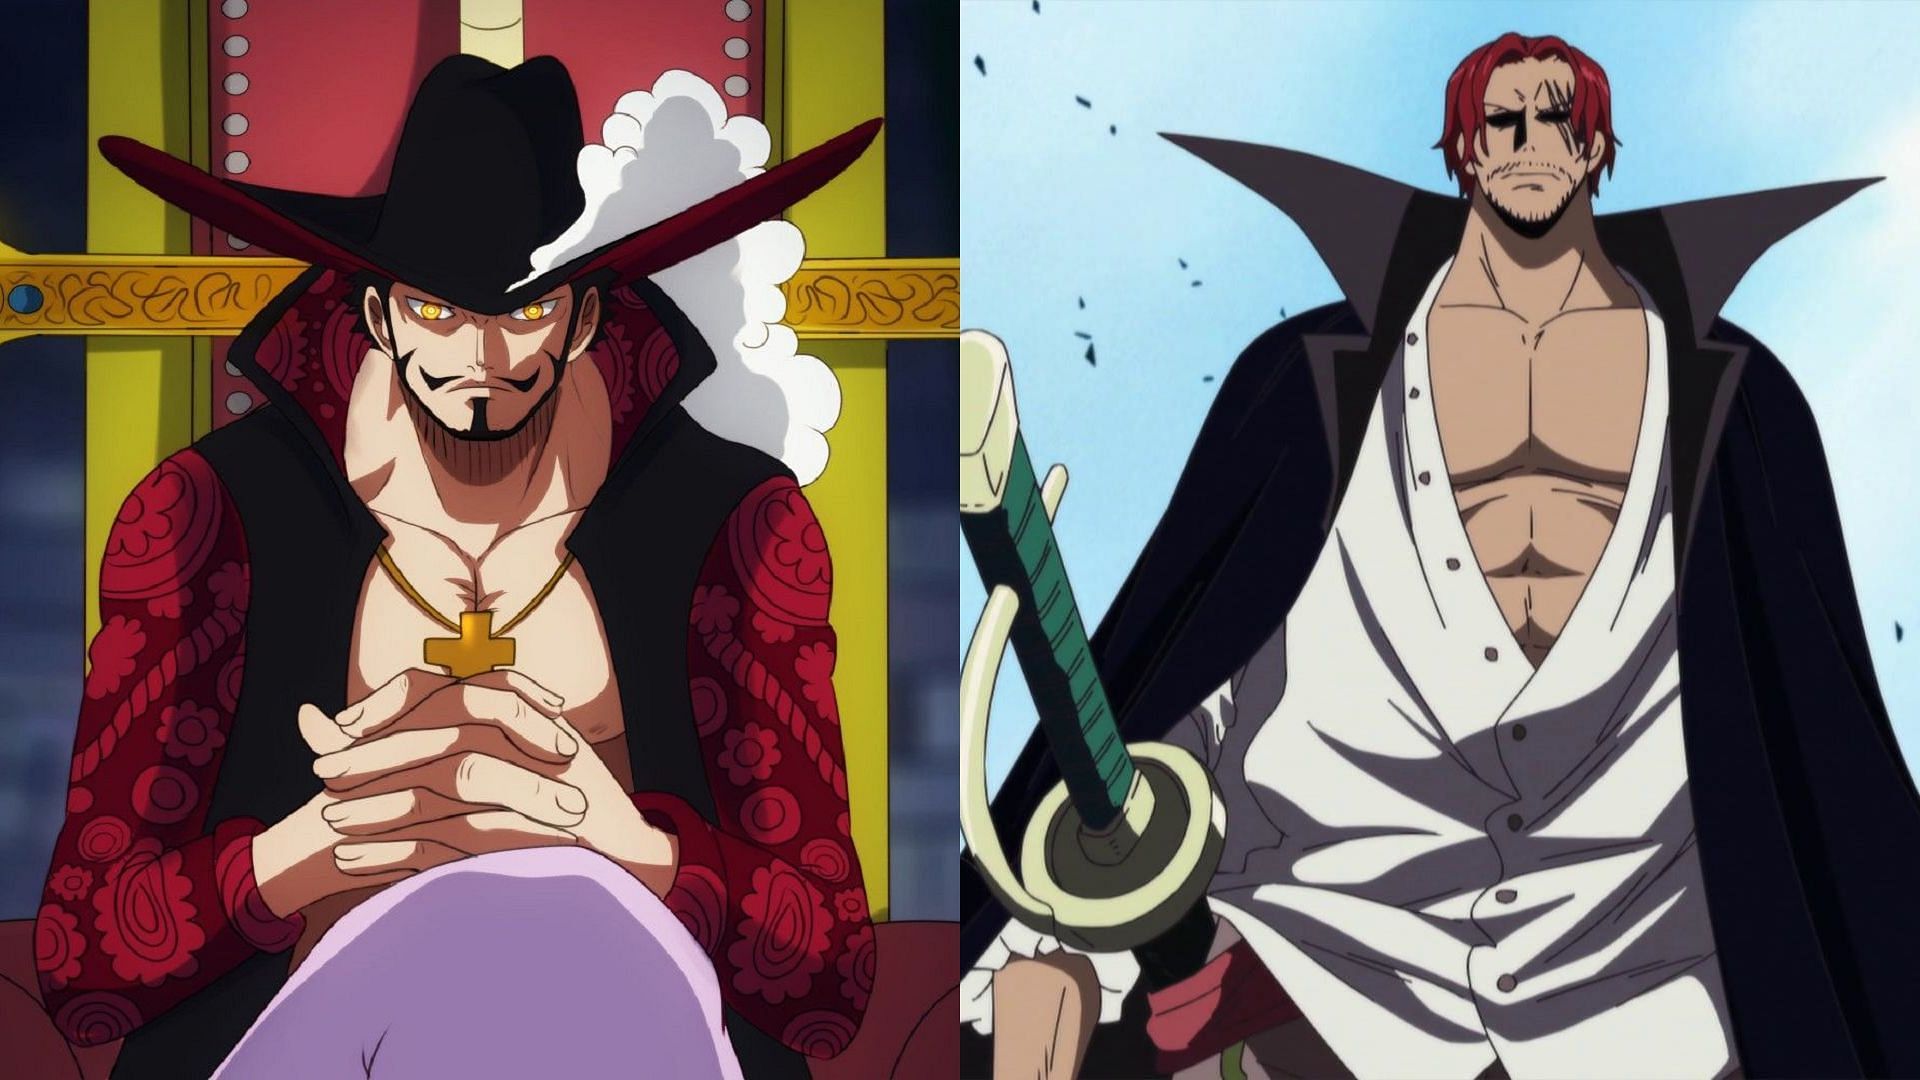 Was The RED LINE Built By The World Govt.? - One Piece Theory